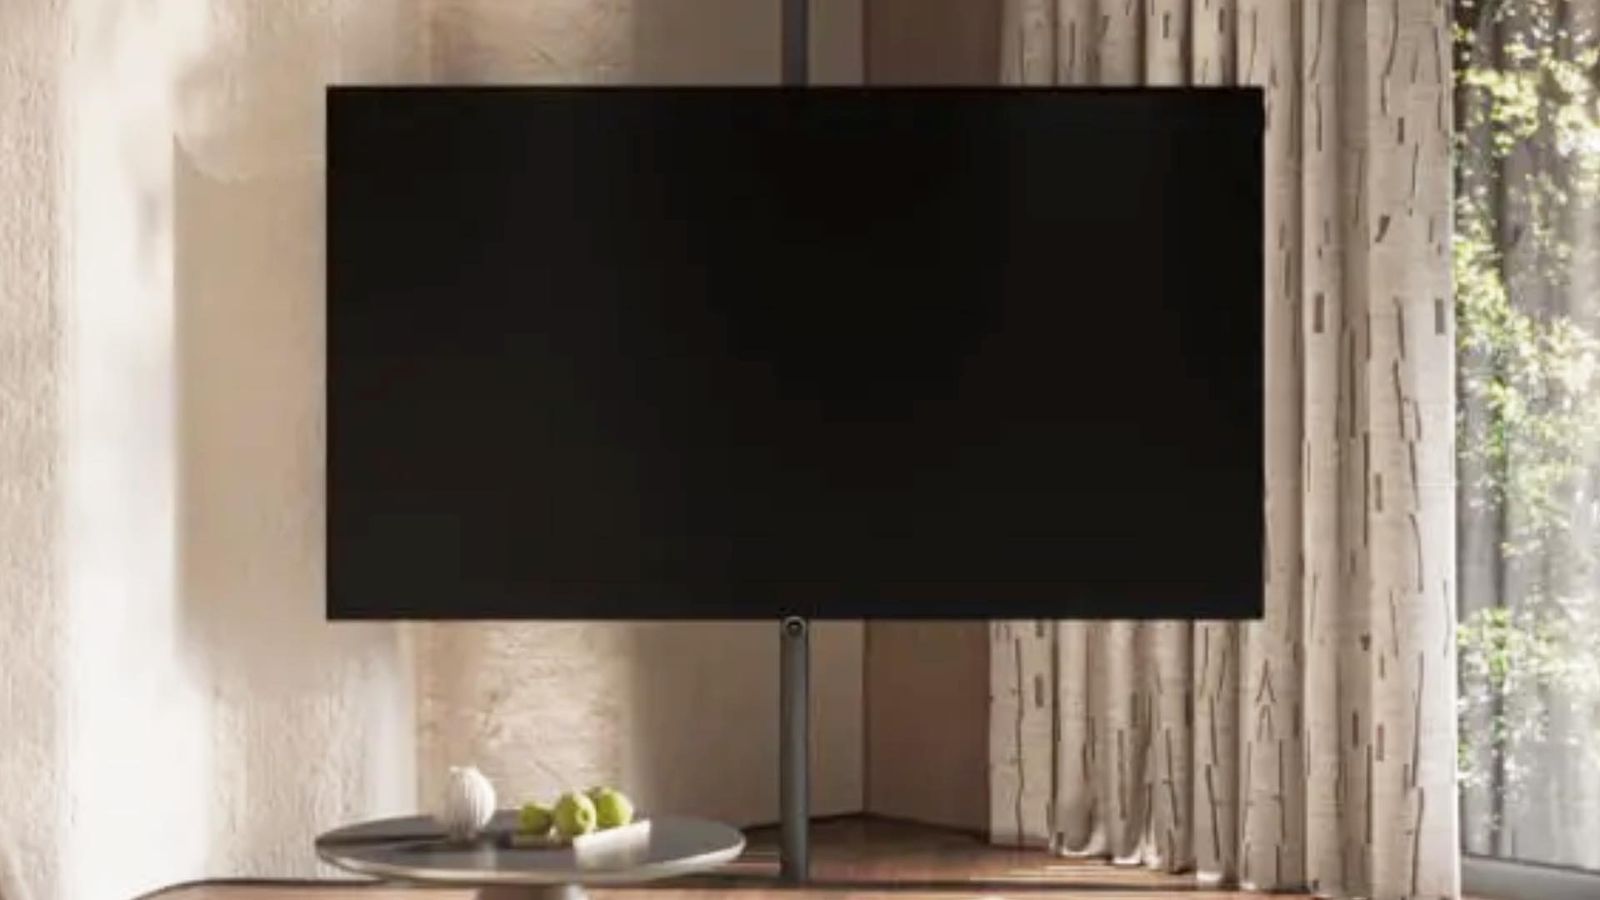 Loewe shoves a 1TB HDD into its new 77" OLED TV 